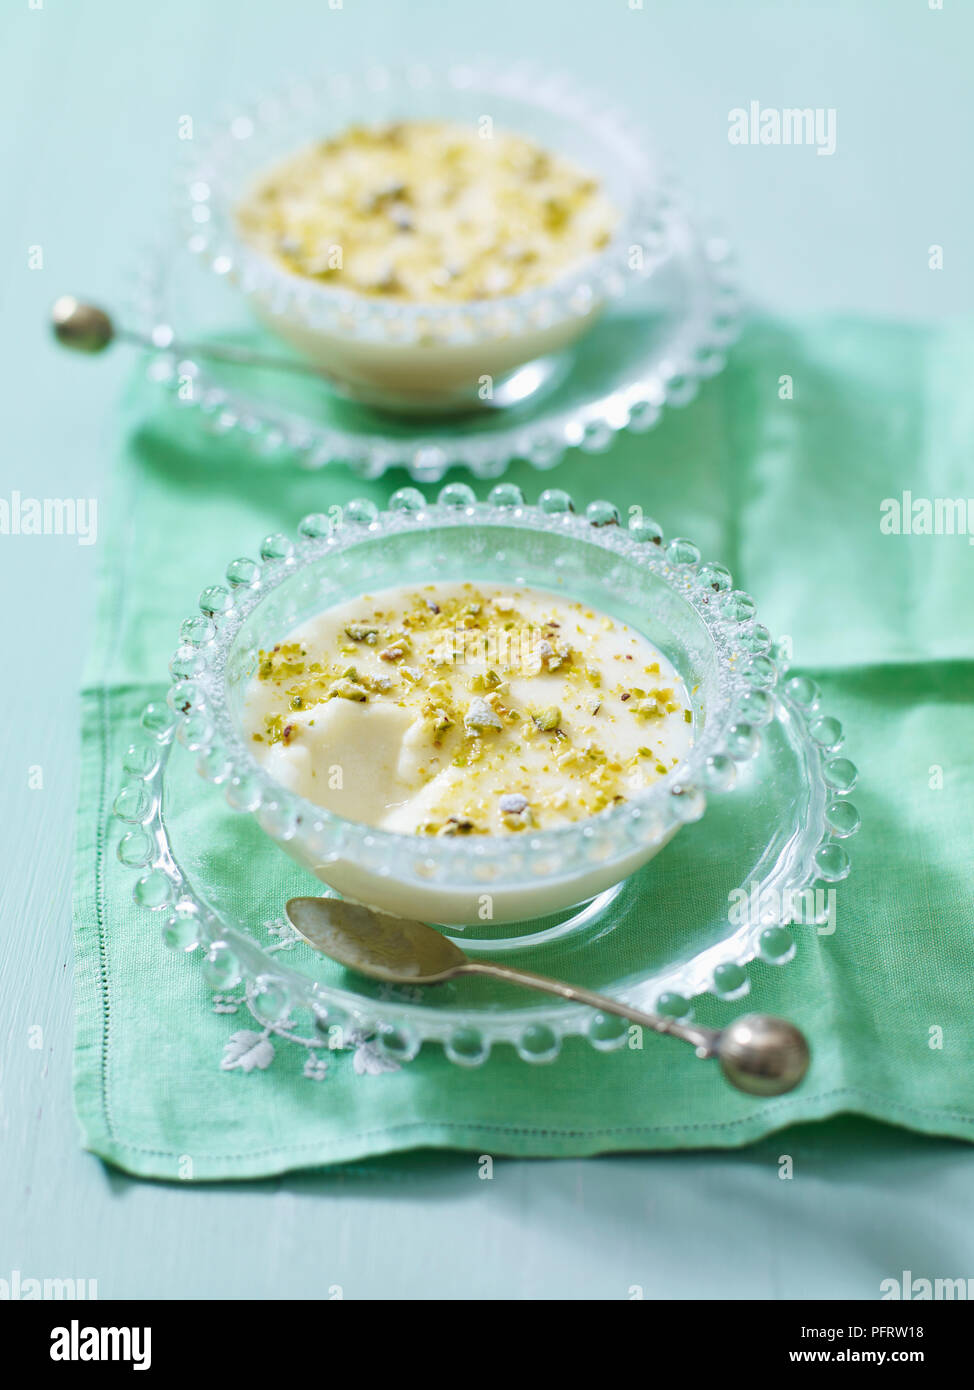 Muhallabia, Middle Eastern milk pudding sprinkled with pistachio nuts Stock Photo